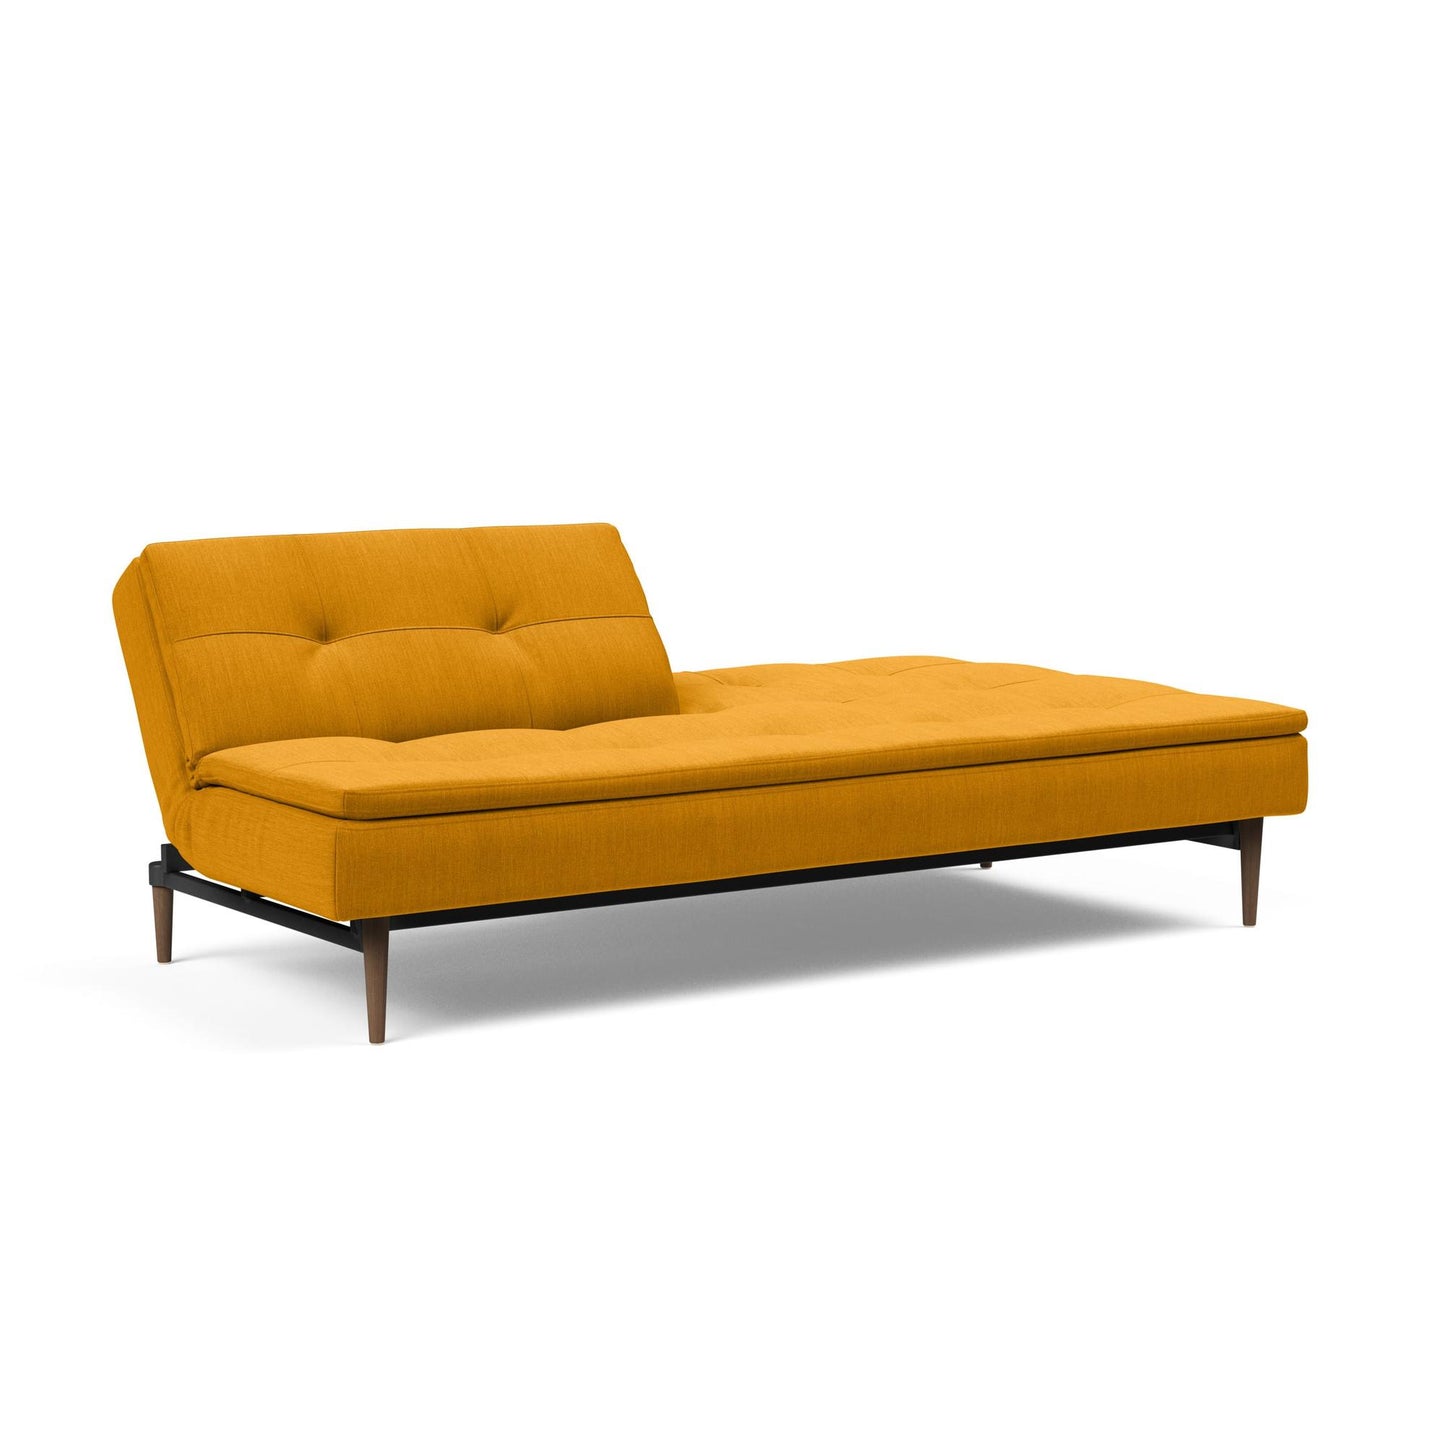 Dublexo Deluxe Sofa Bed in Elegance Burned Curry